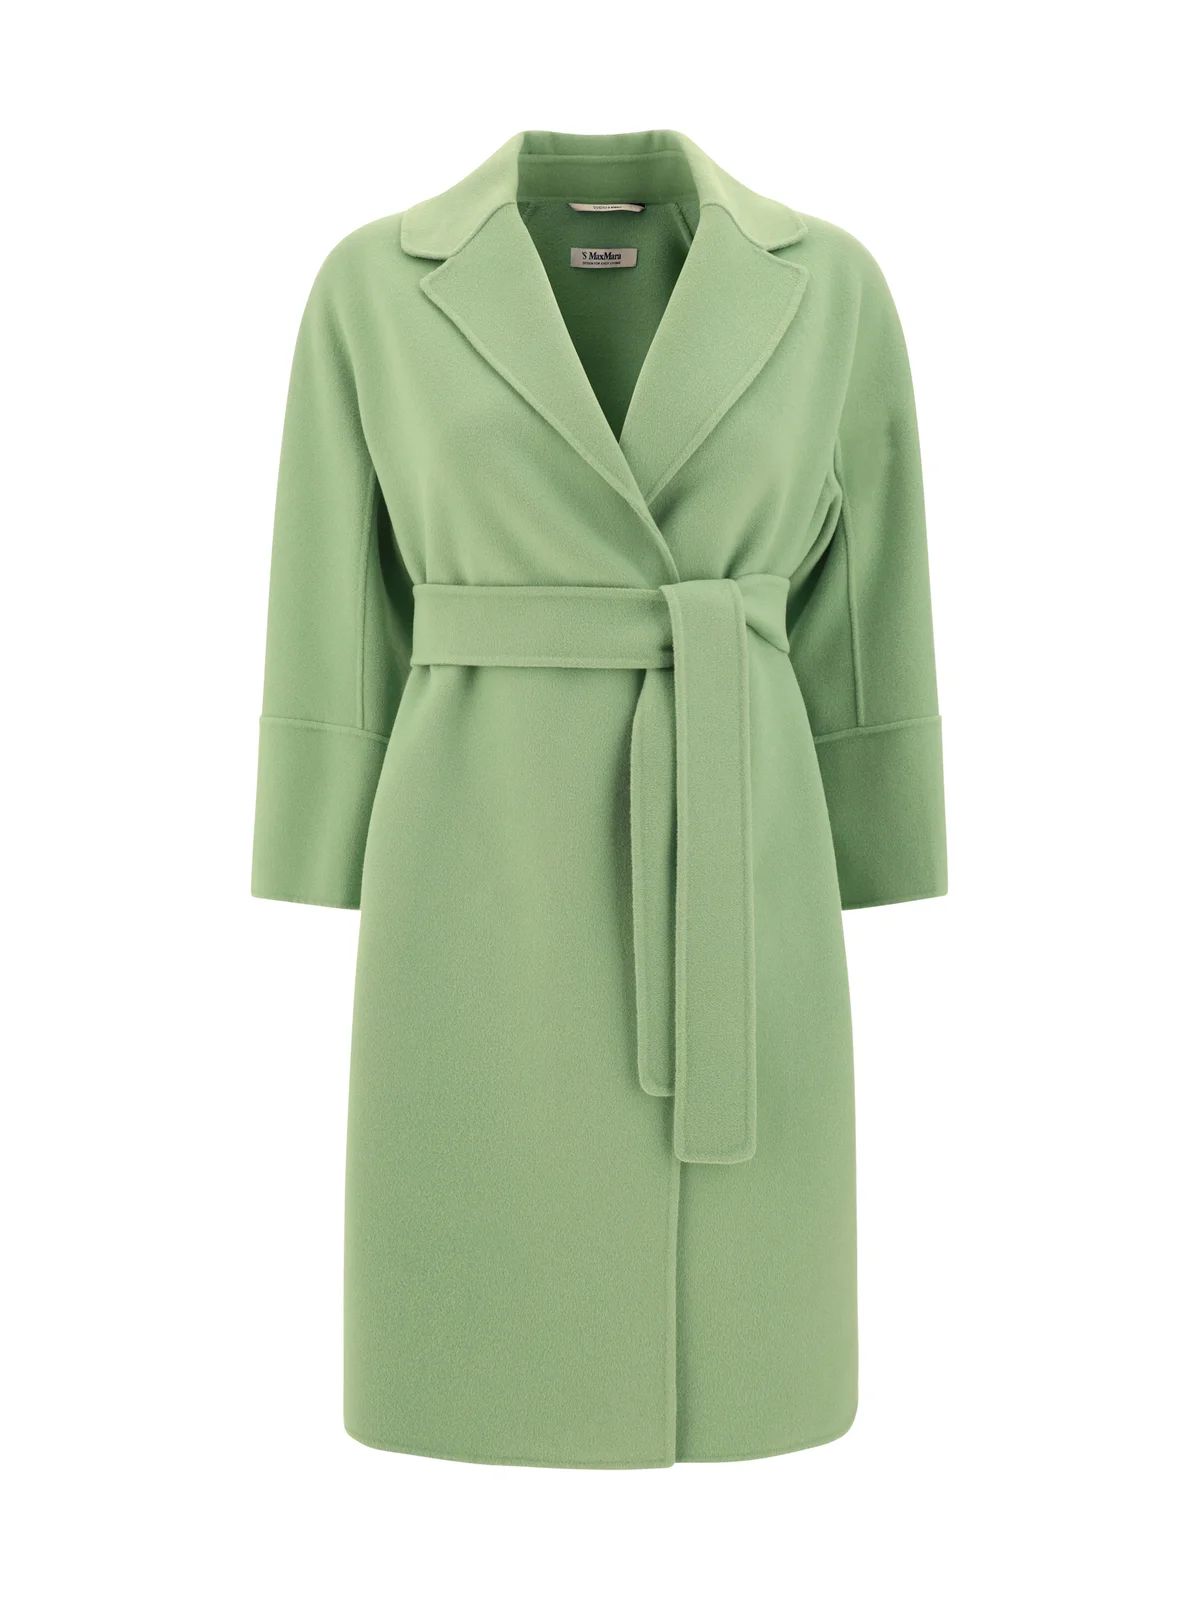 'S Max Mara Belted Long-Sleeved Coat | Cettire Global